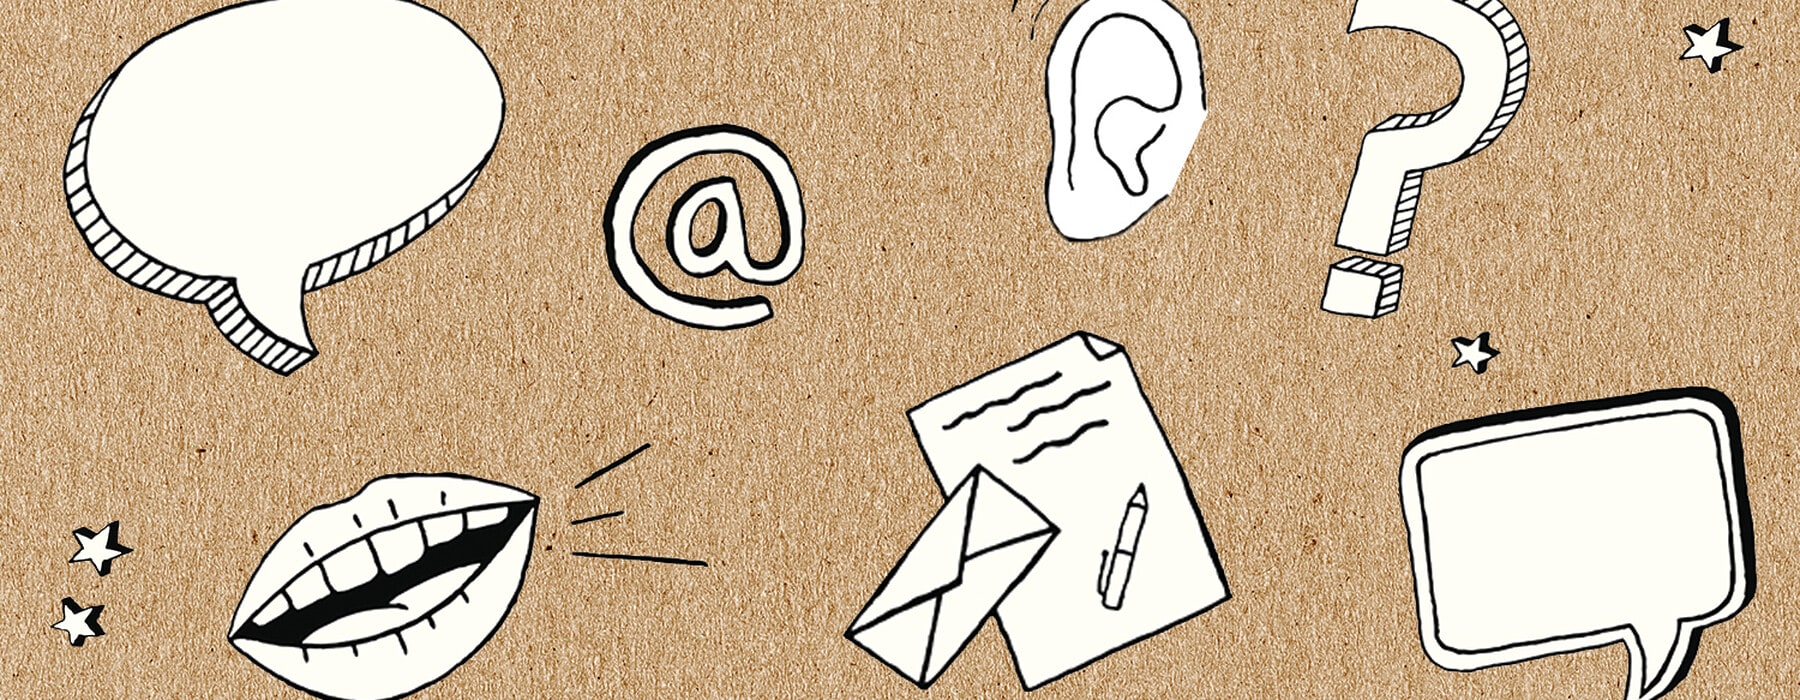 Communicaton-doodles-on-brown-paper-background